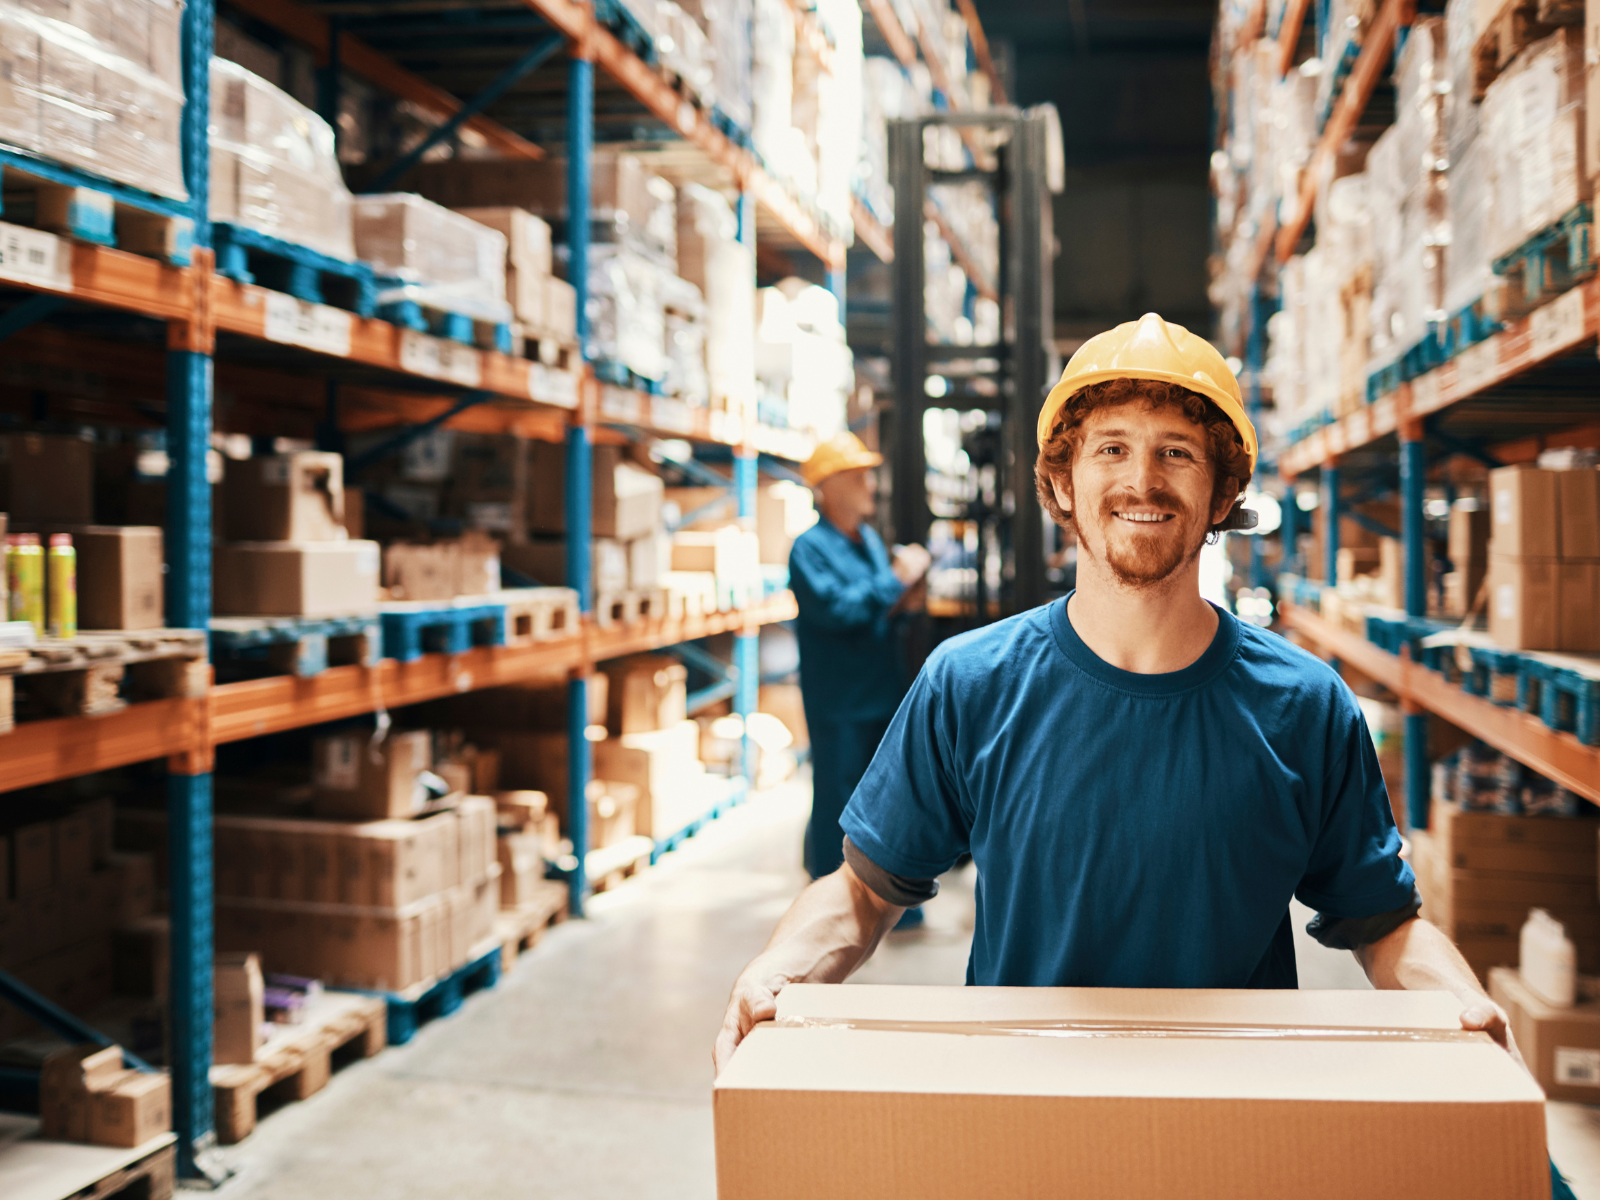 smiling man in a warehouse isle holding a cardboard box surrounded by other boxes on shelves